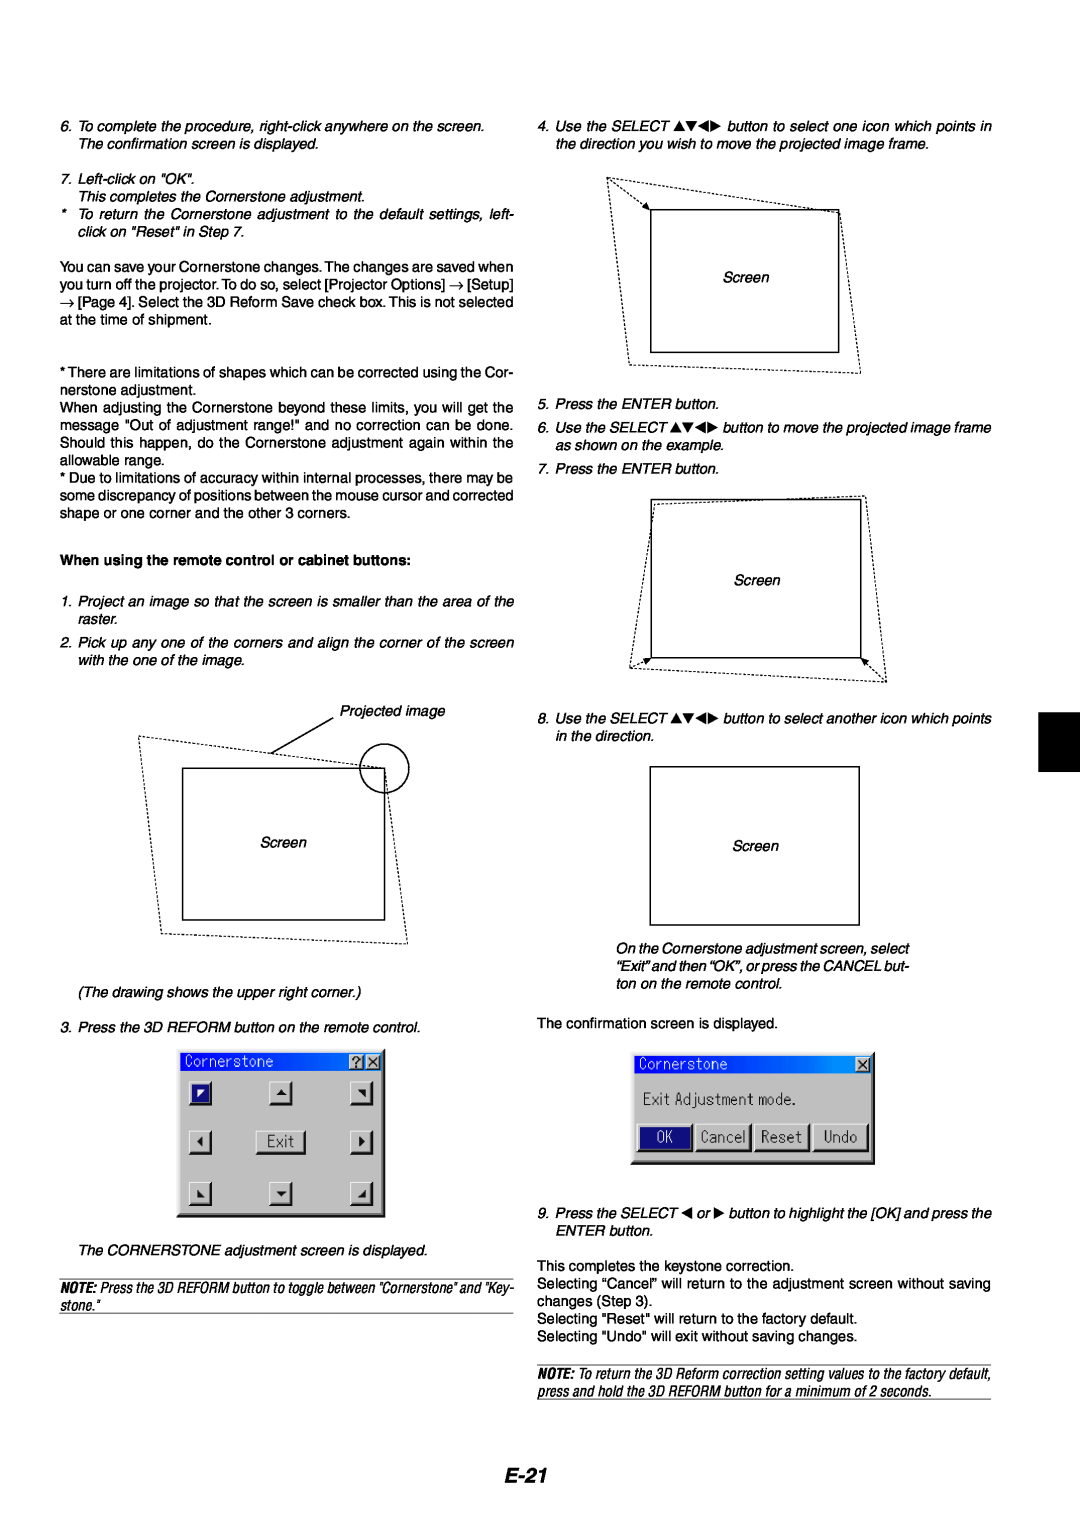 NEC MT1060 user manual E-21, When using the remote control or cabinet buttons 